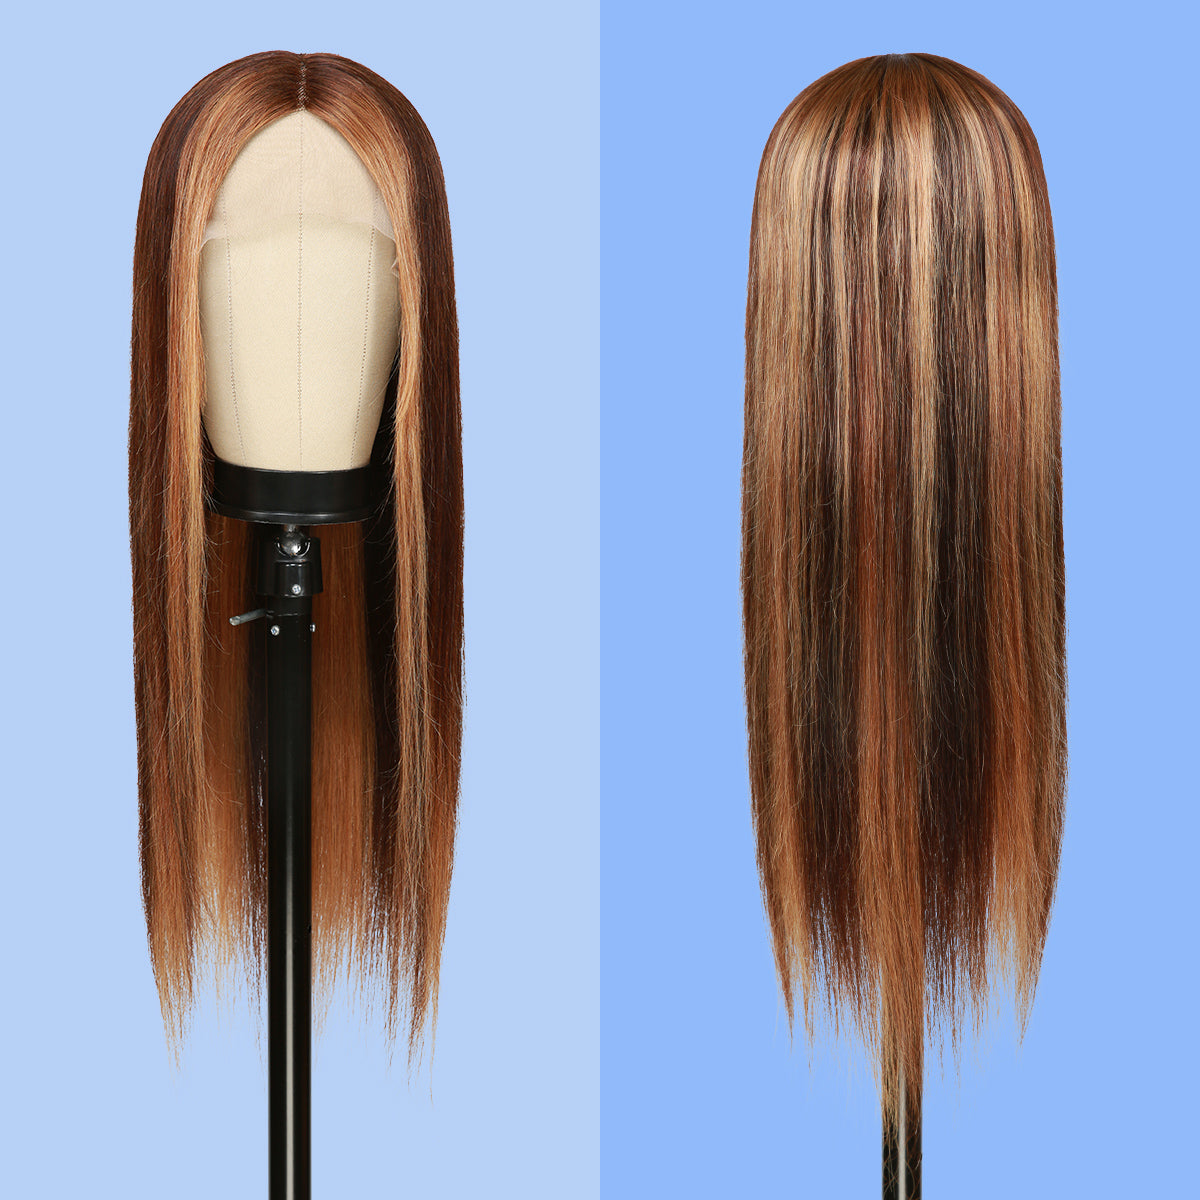 T shape lace part wig gives natural hairline and realistic lace part with affordable price, 100% Human Hair Pre-dyed Fancy Color For Black Women, 150% Density High Quality Blonde Hair, Pre-Plucked with Baby Hair, Balayage Brown Chunky Highlight Straight Hair, Beautiful ombre brown highlight color fashion and elegant and charming